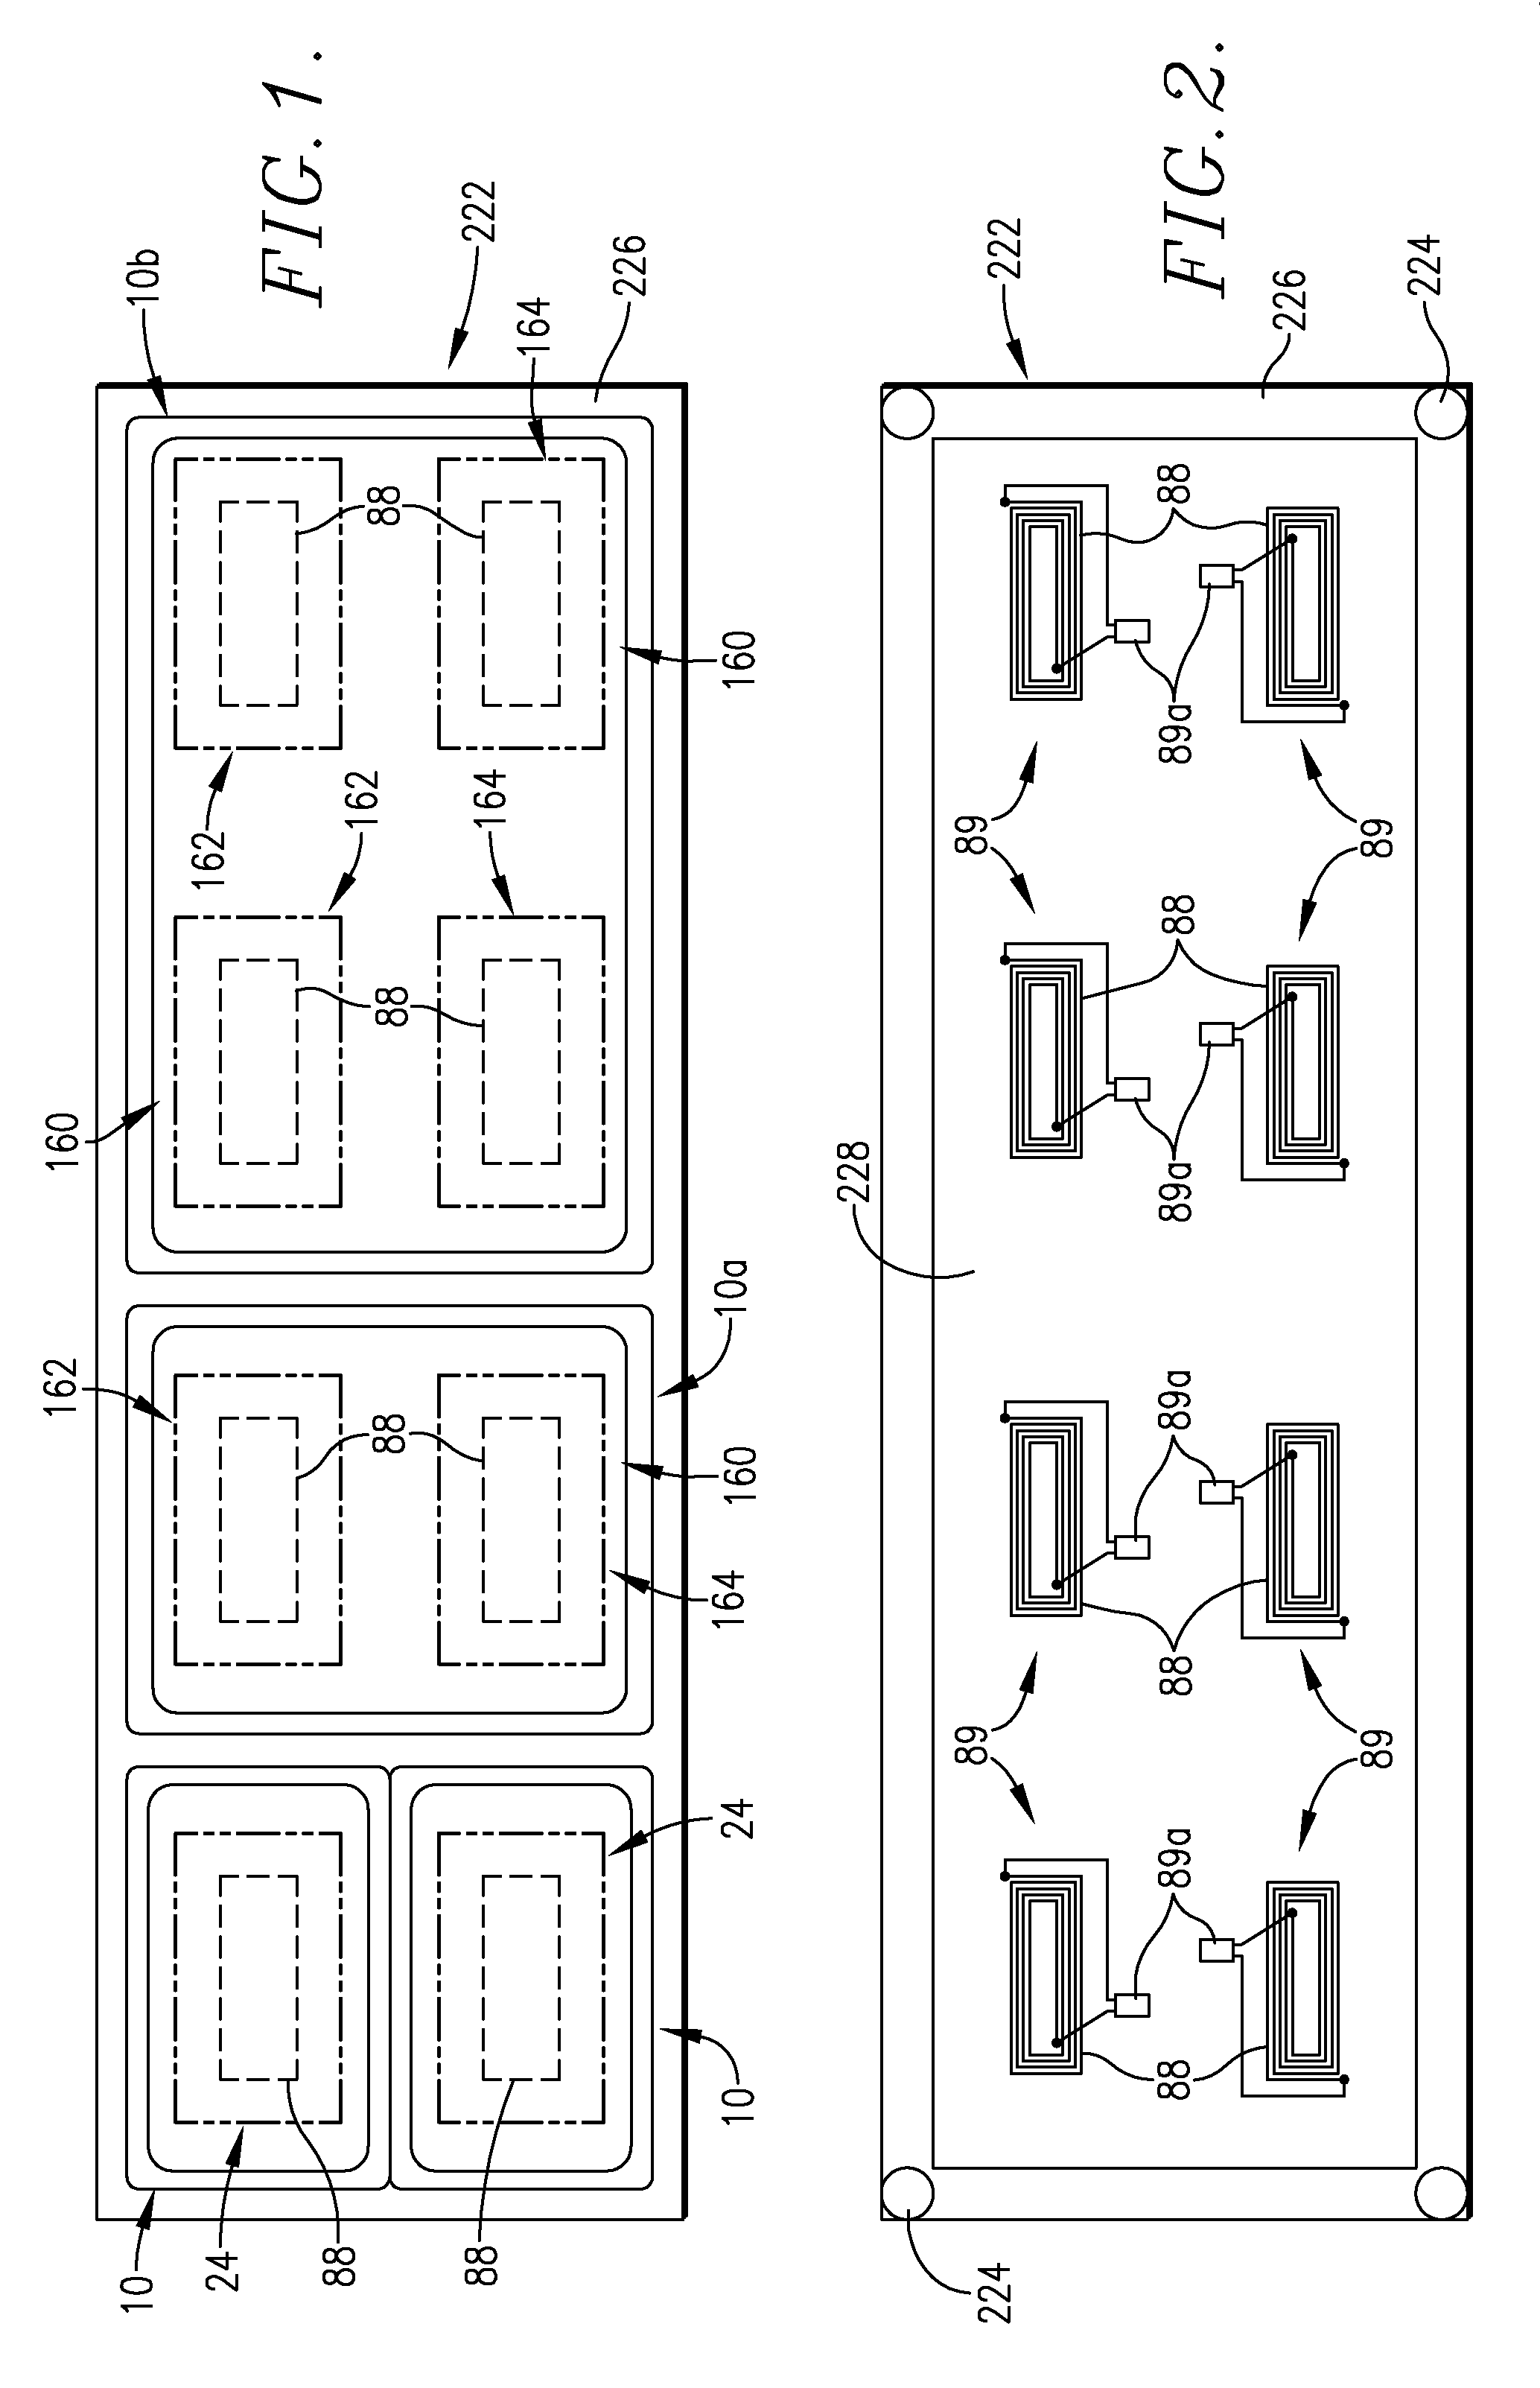 Induction heating system employing induction-heated switched-circuit vessels